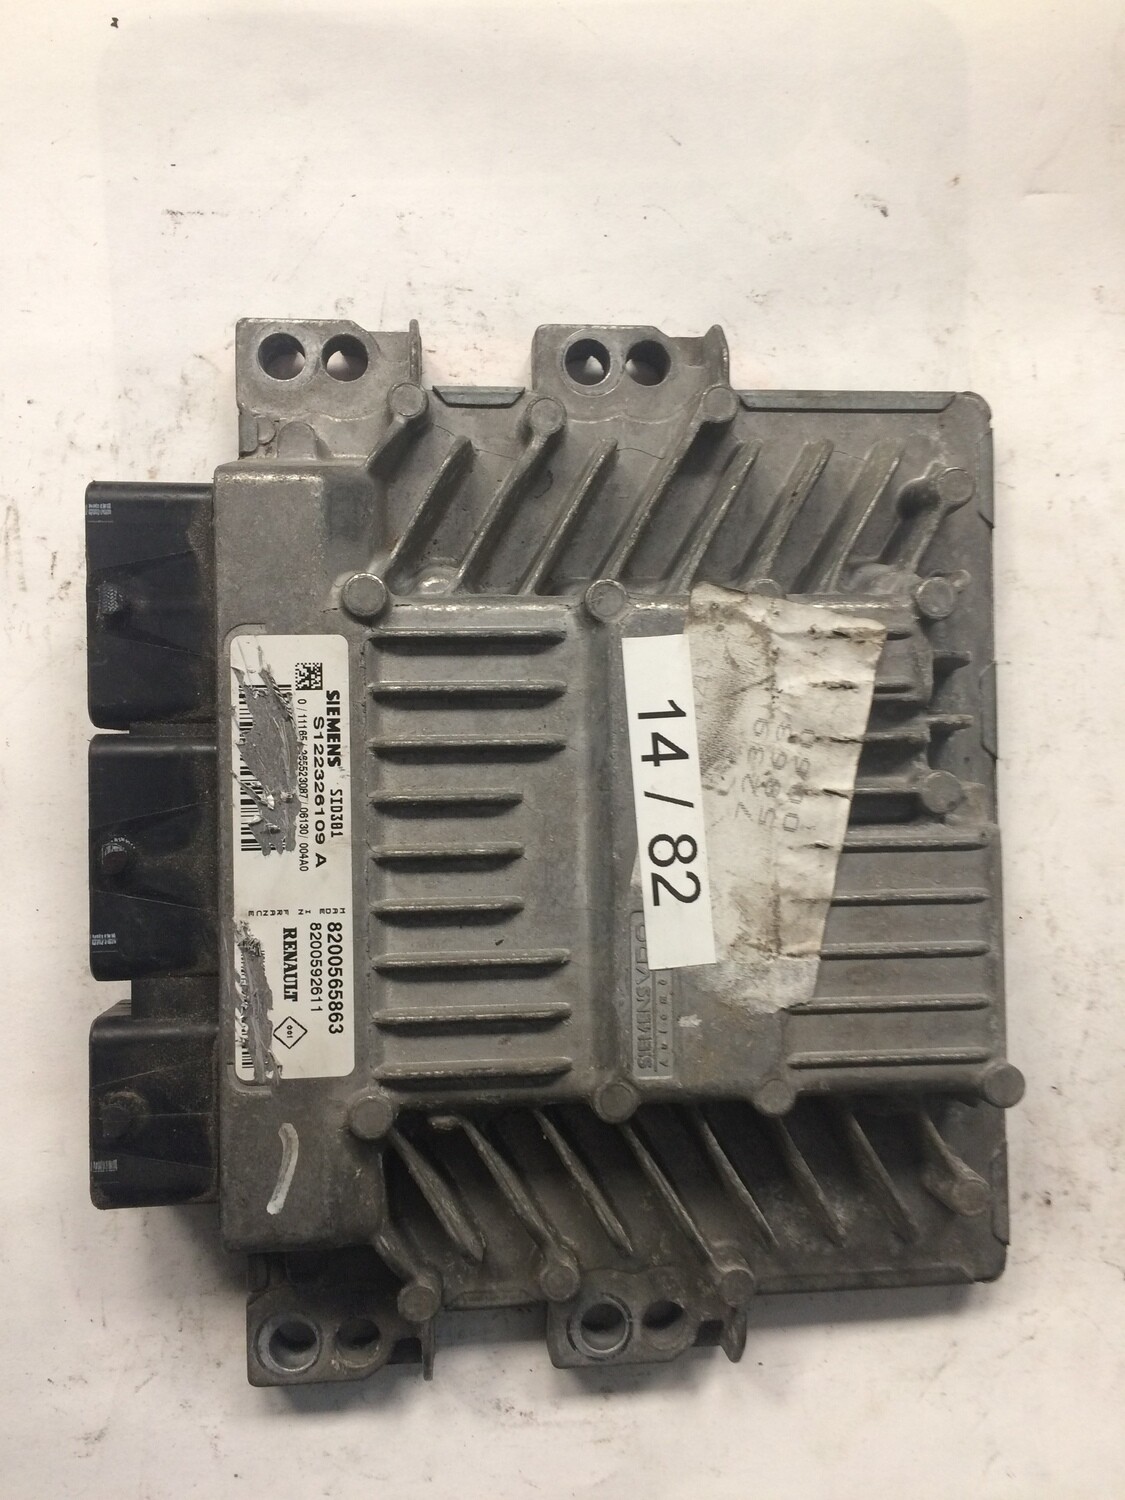 14-82 Centralina Motore Siemens S122326109A S122326109 A 8200565863 8200565863 8200592611 8200592611 SID301 RENAULT MEGANE 1.5 DCI